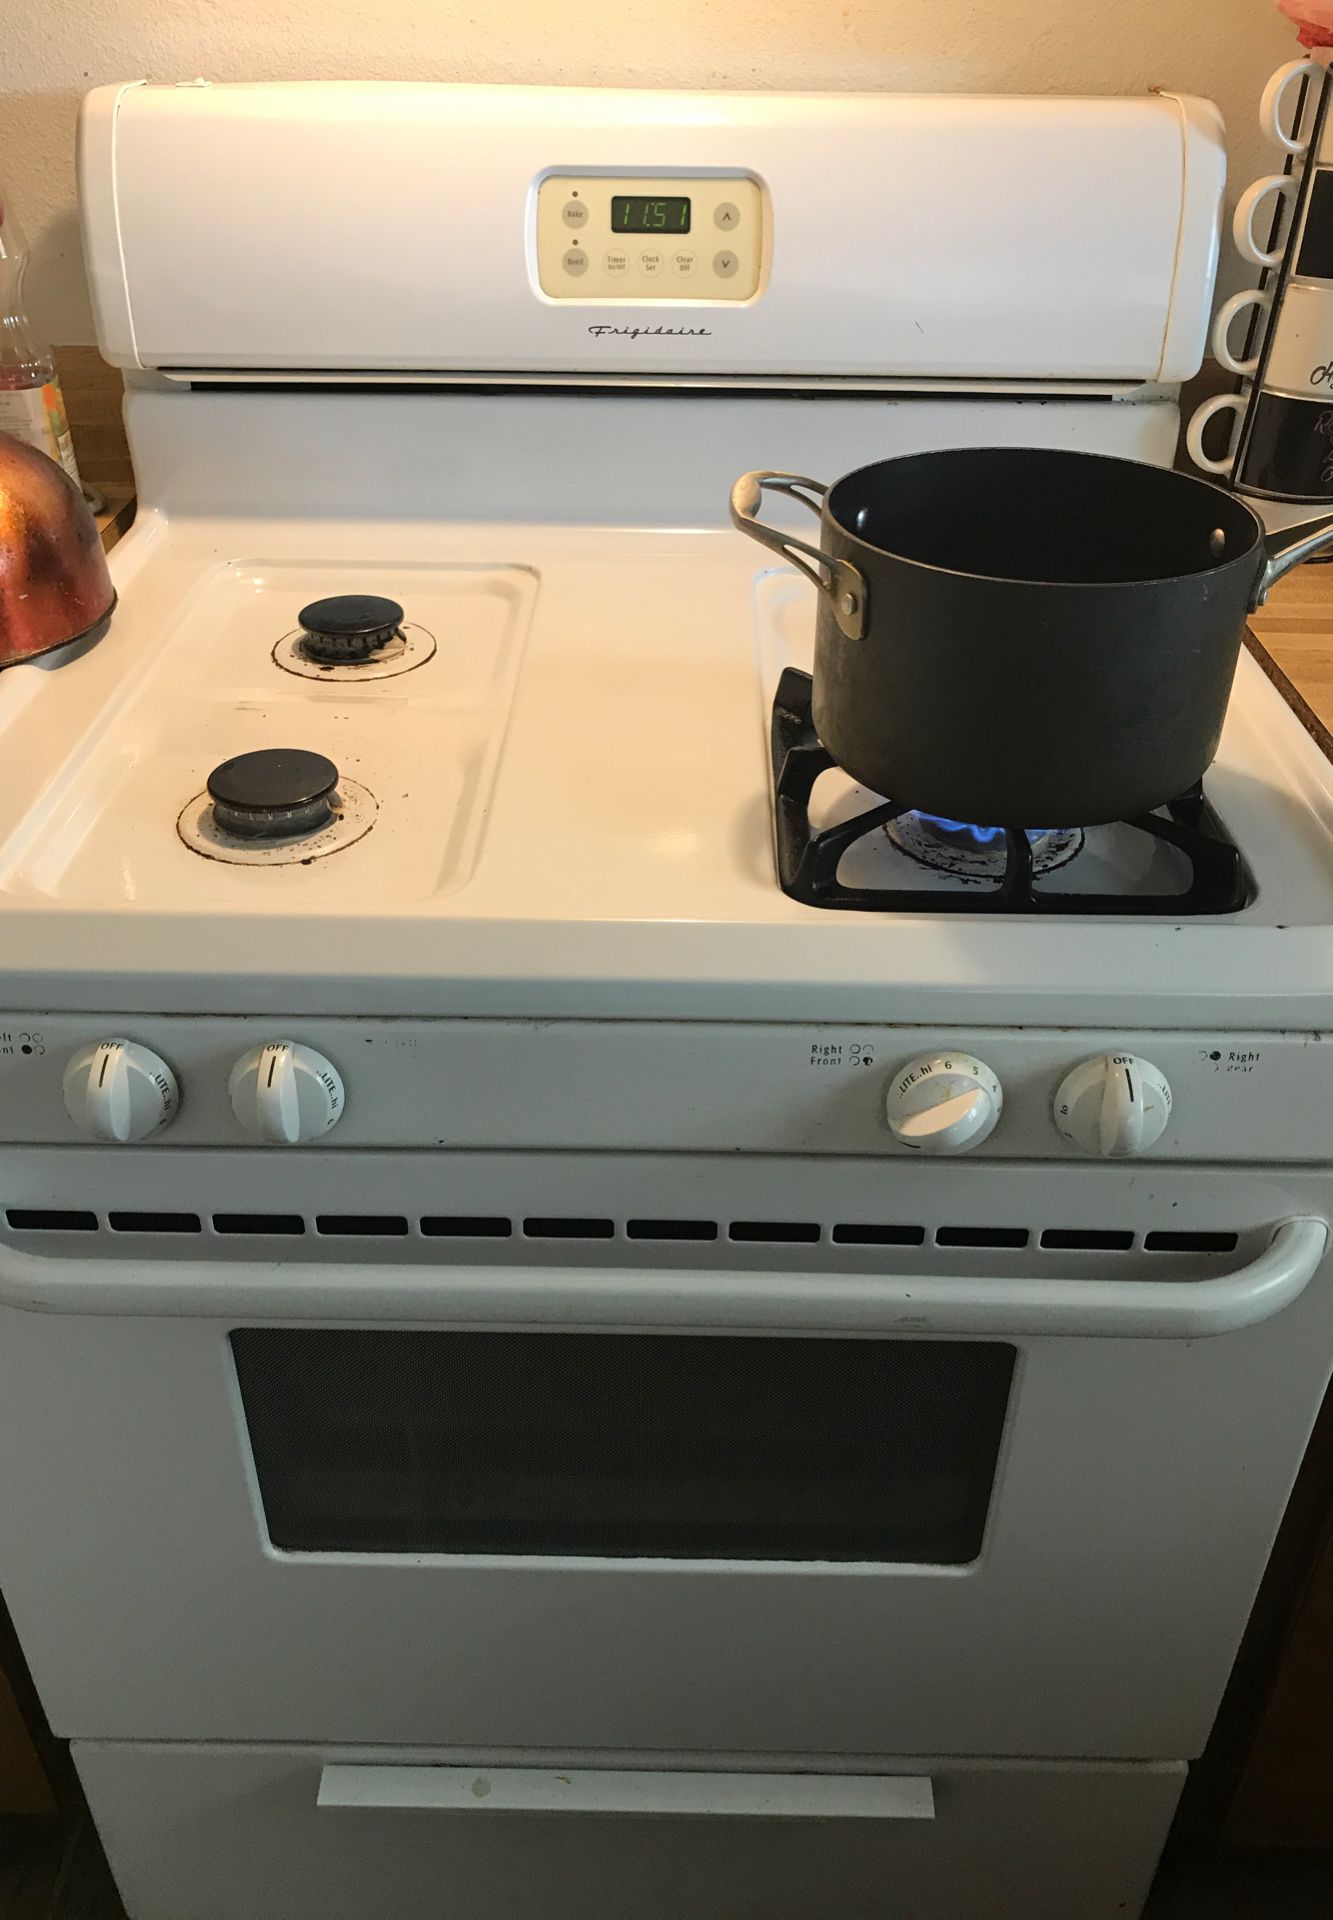 Used gas stove I’m sale it cause someone gave me new as gift this is gas stove only problem is Oven truns off other that it good you can fix oven